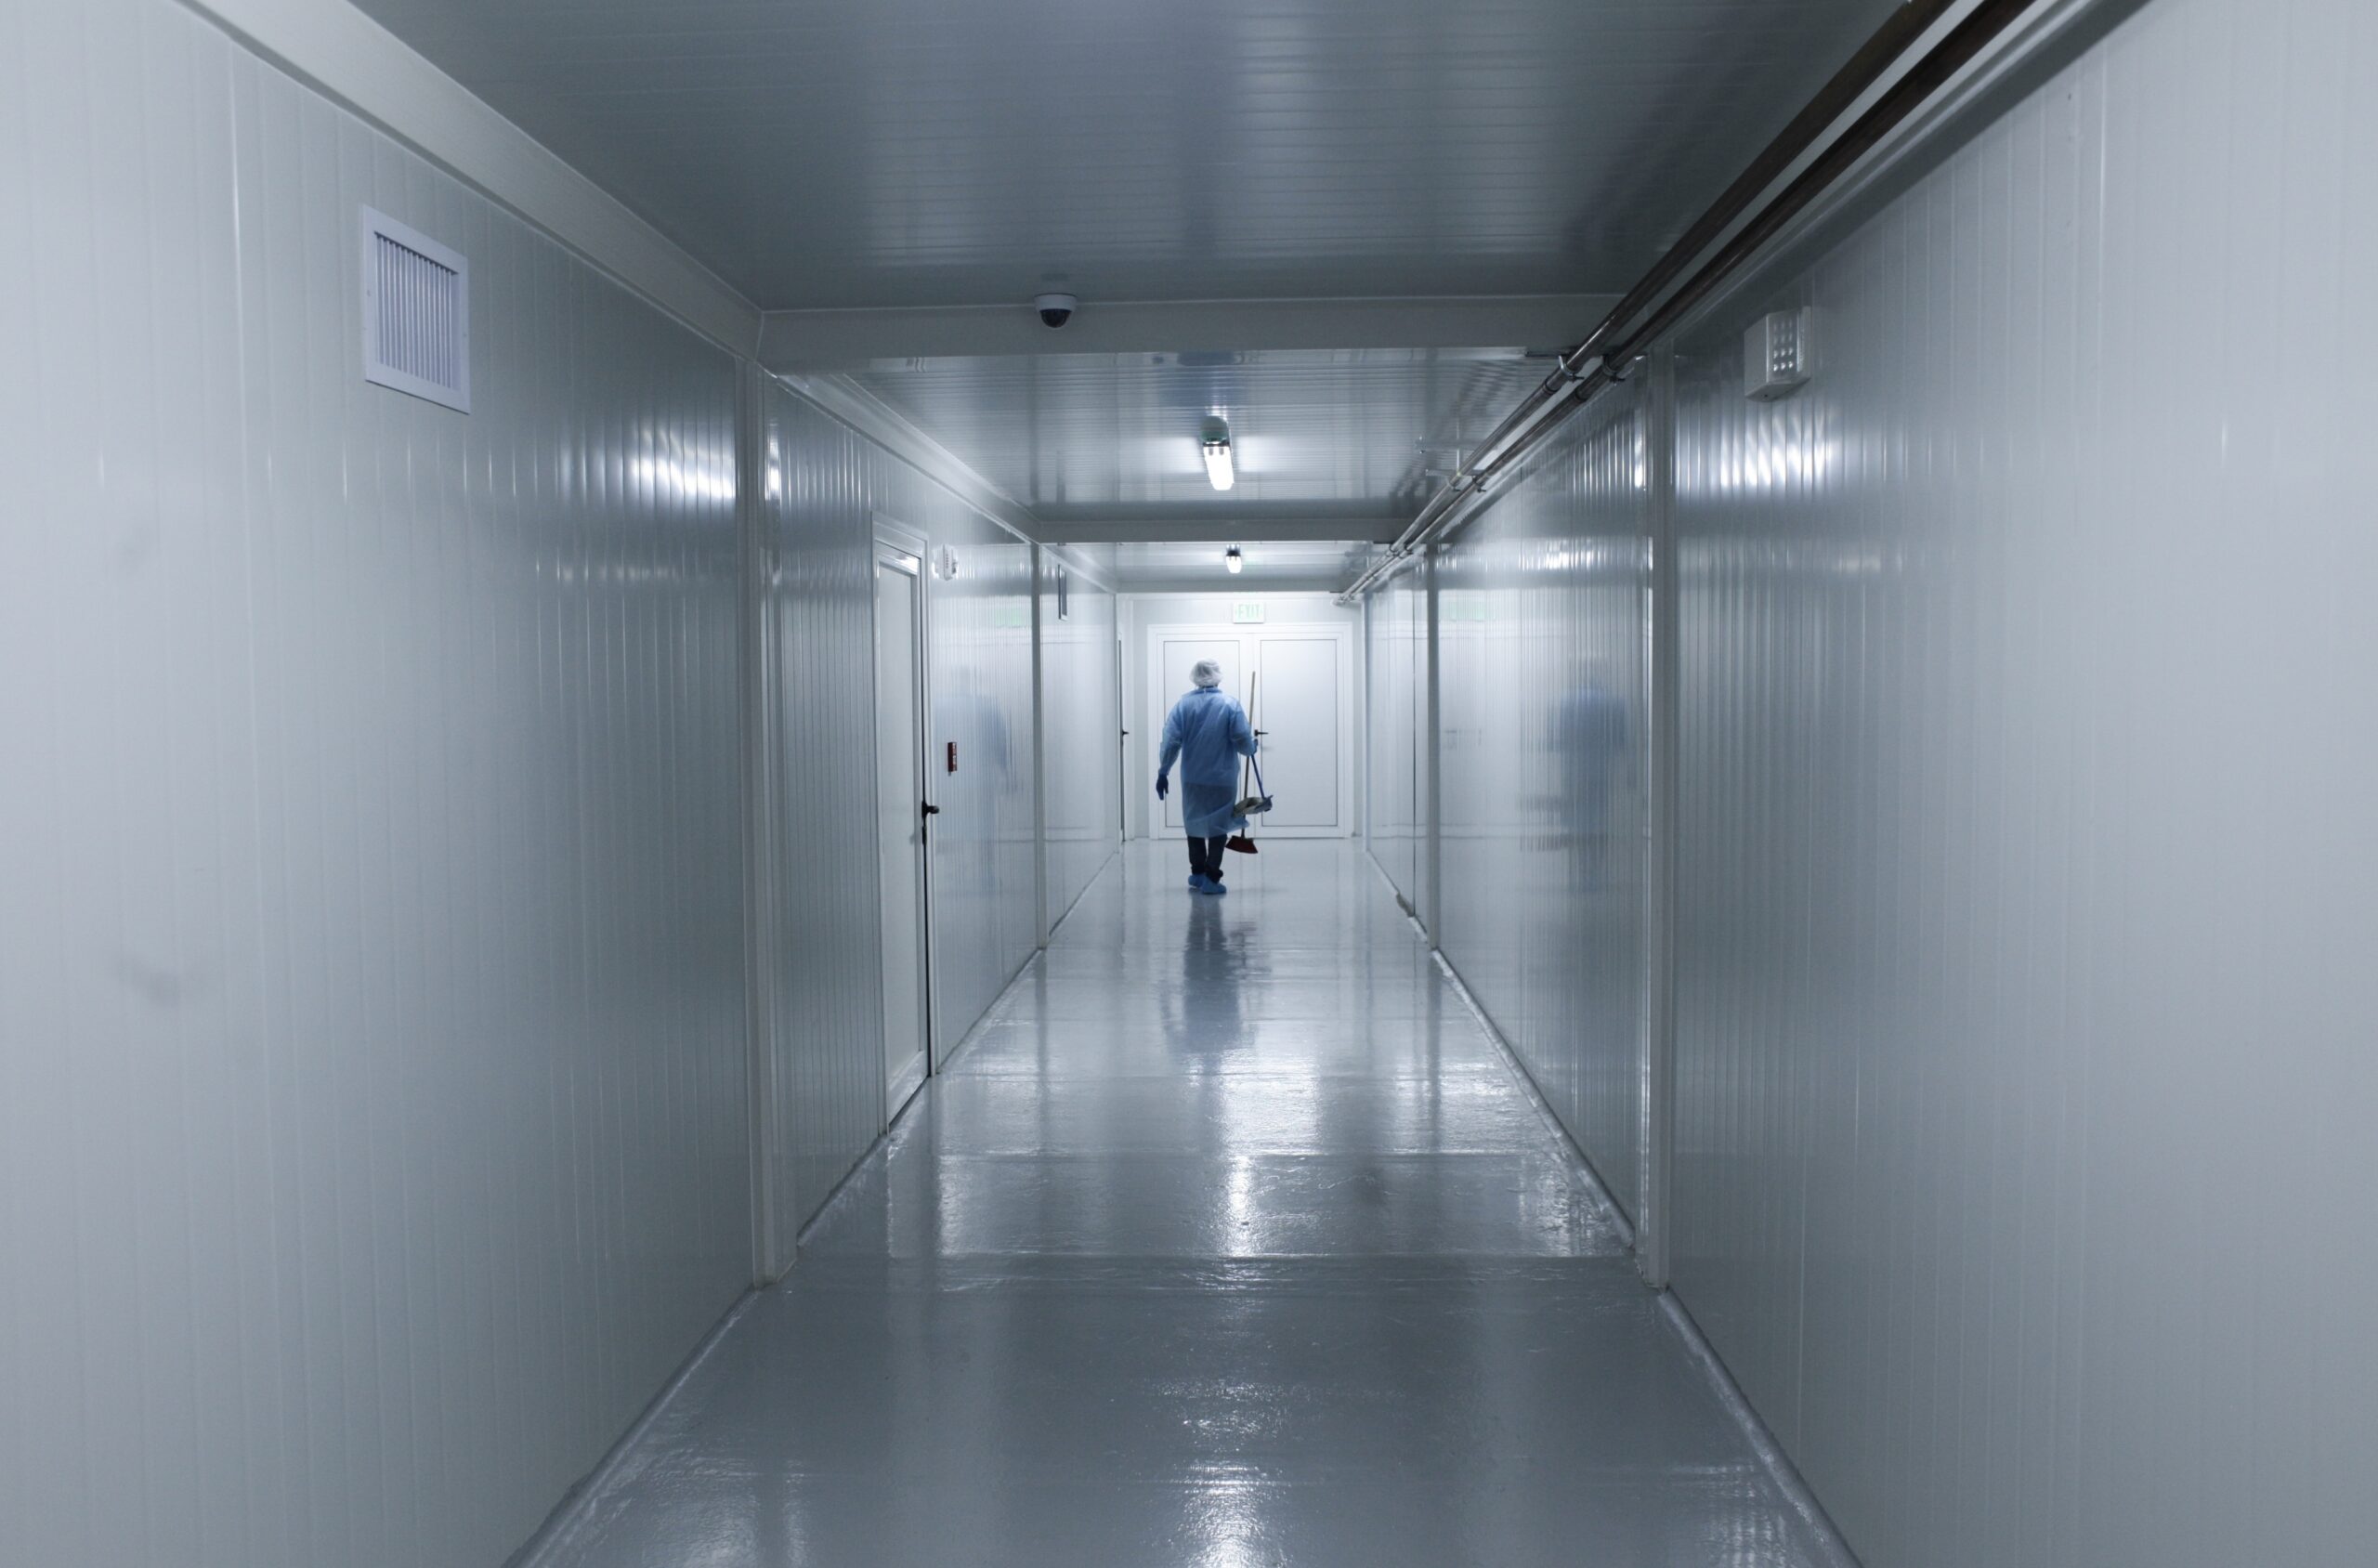 A worker wearing protective gear walks down the corridor of a new health facility